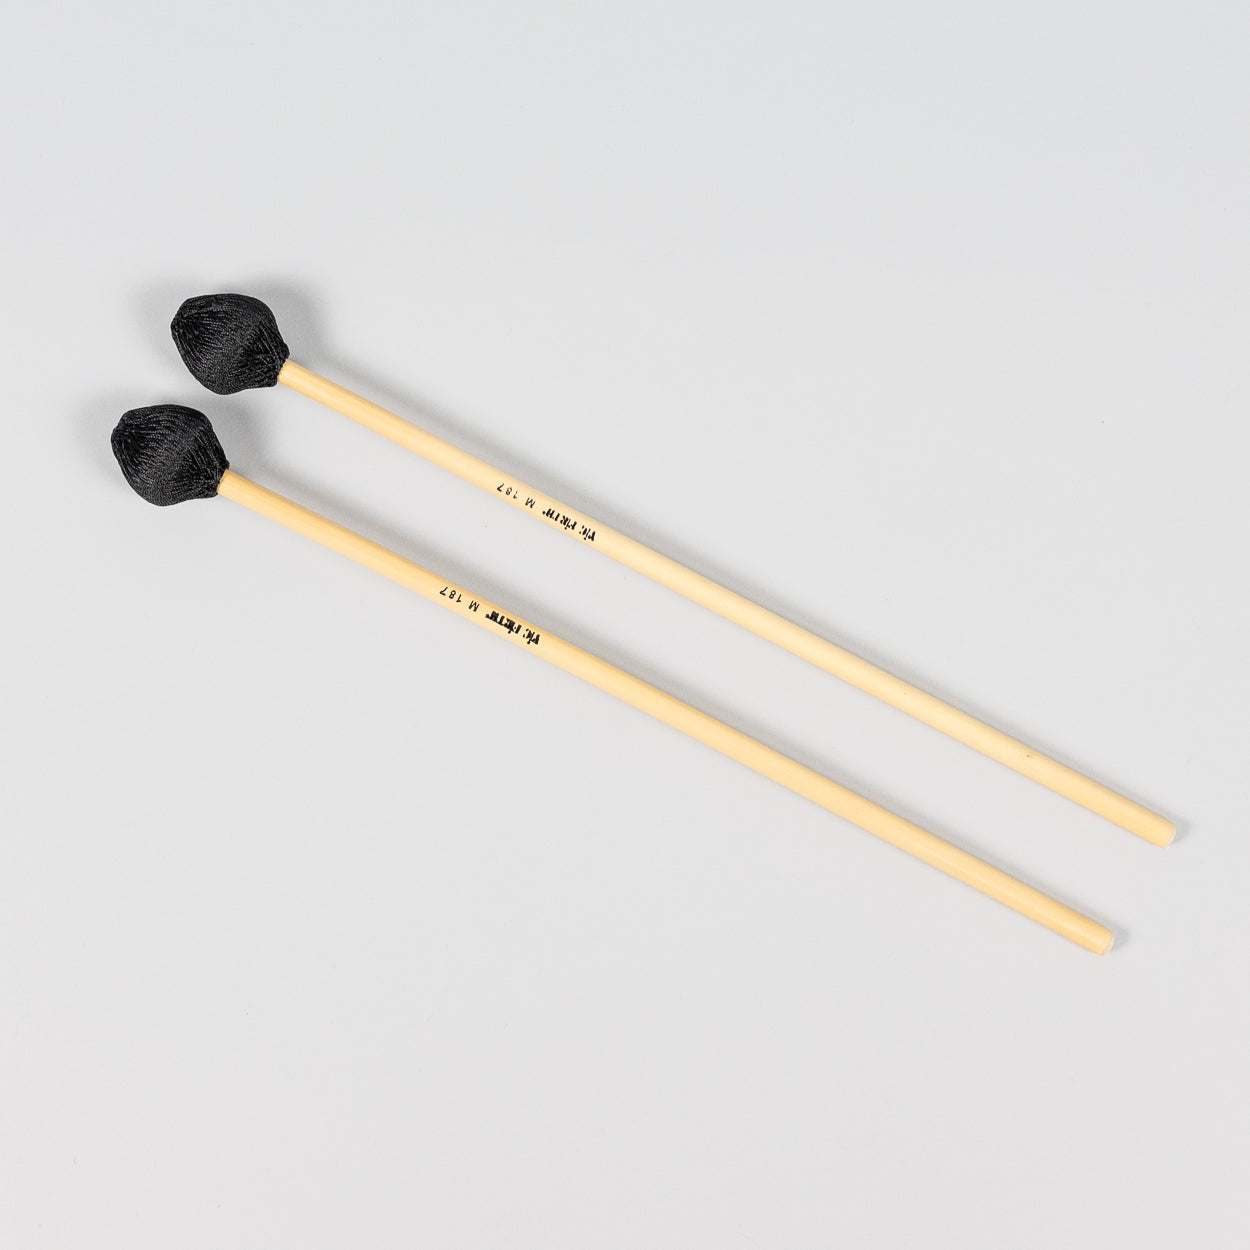 Vic Firth M187 Corpsmaster Multi-Application Series Mallets, Medium Hard / Weighted Rubber Core